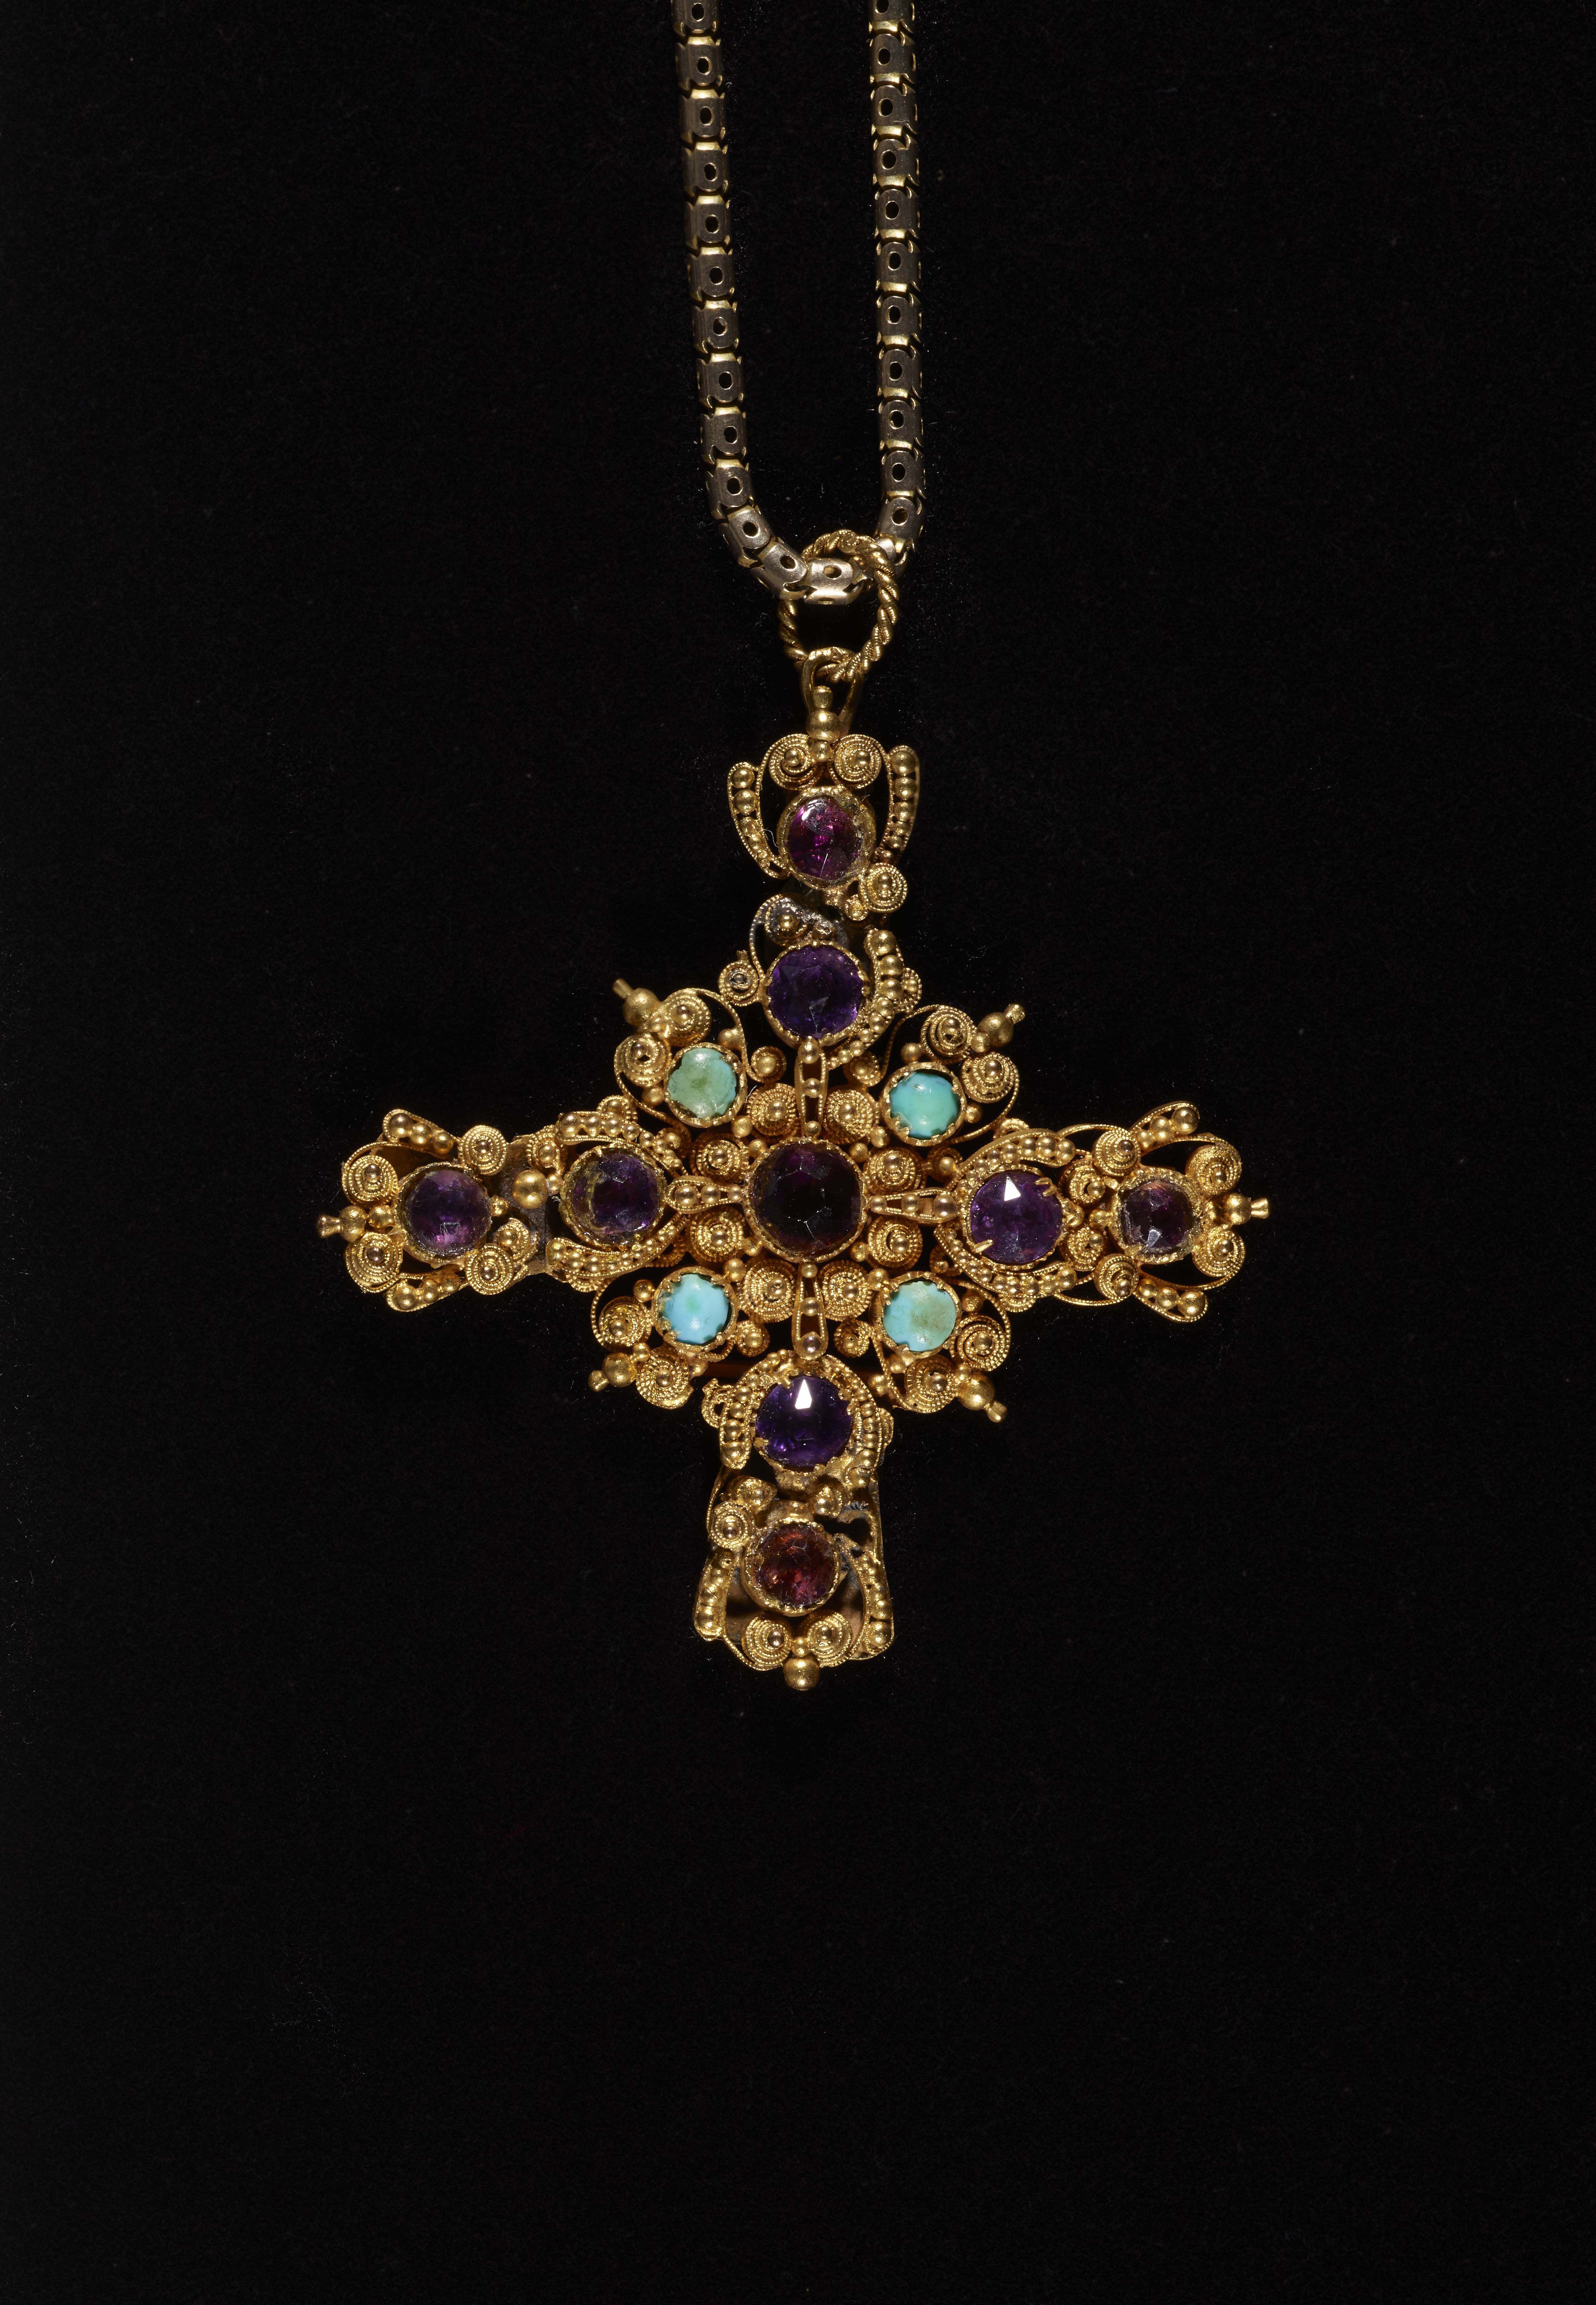 A gold crucifix necklace with inset gemstones